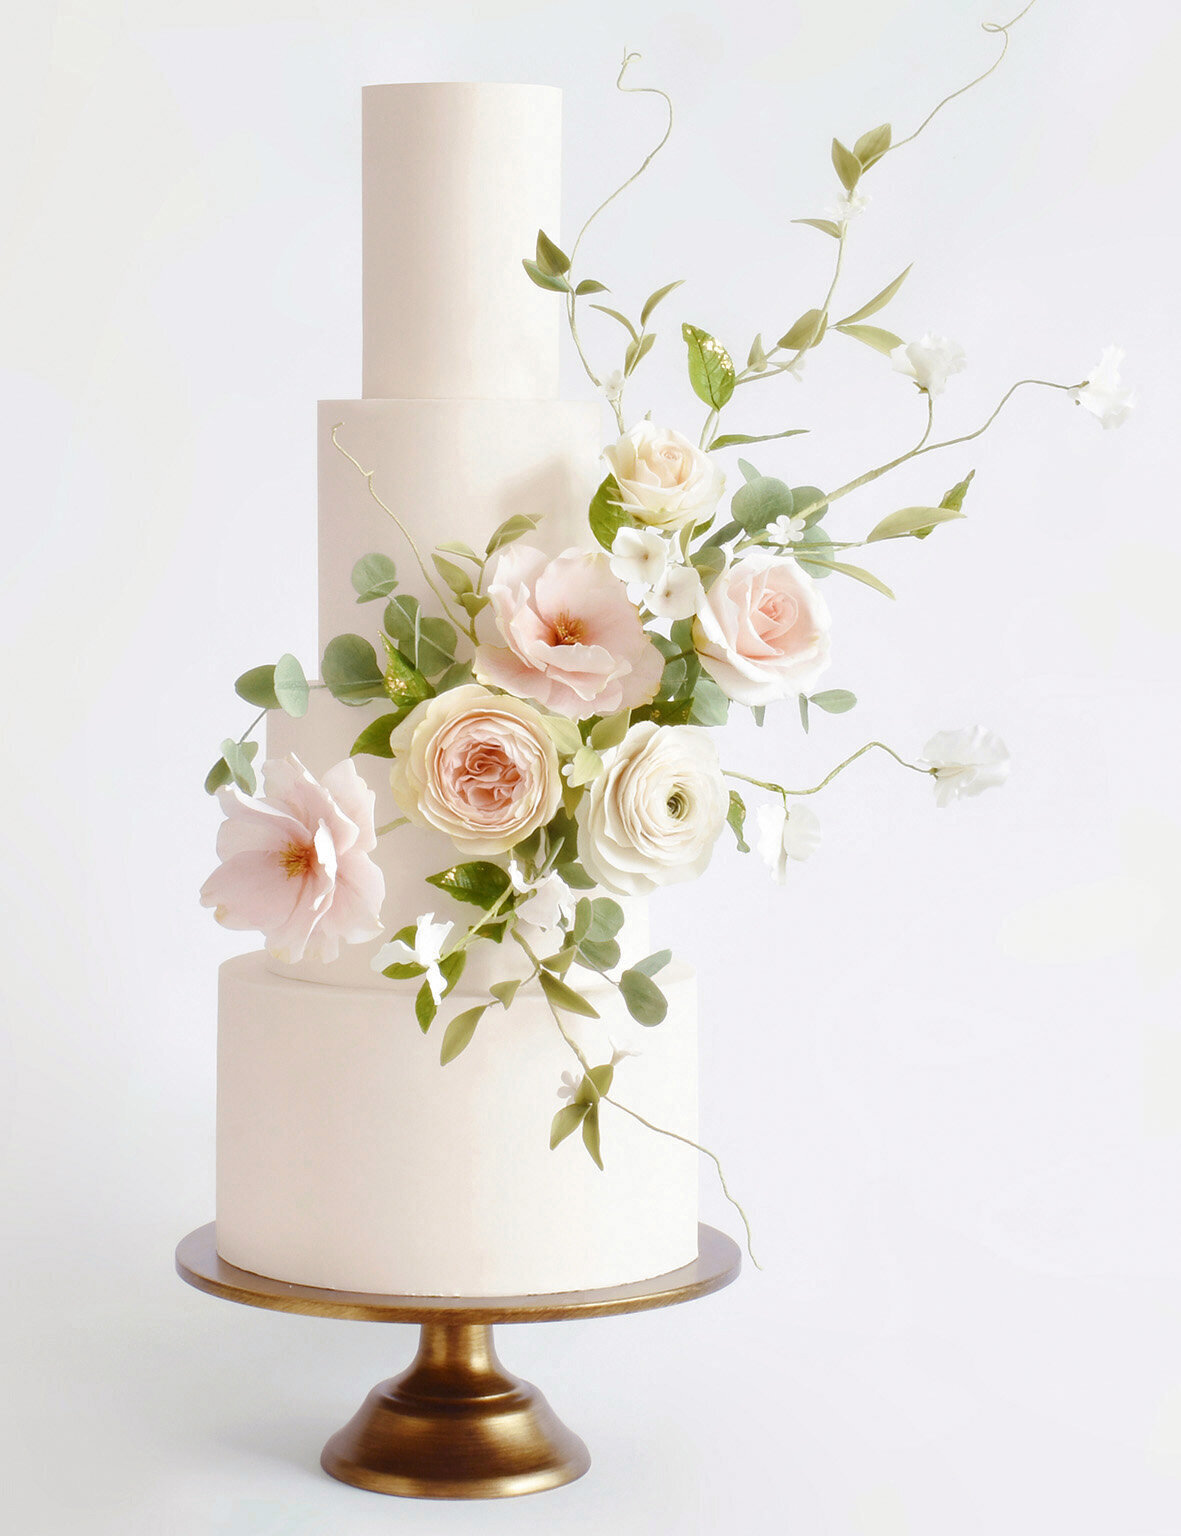 Pretty four tiered wedding cake with pristine icing and wild sugar flowers and foliage